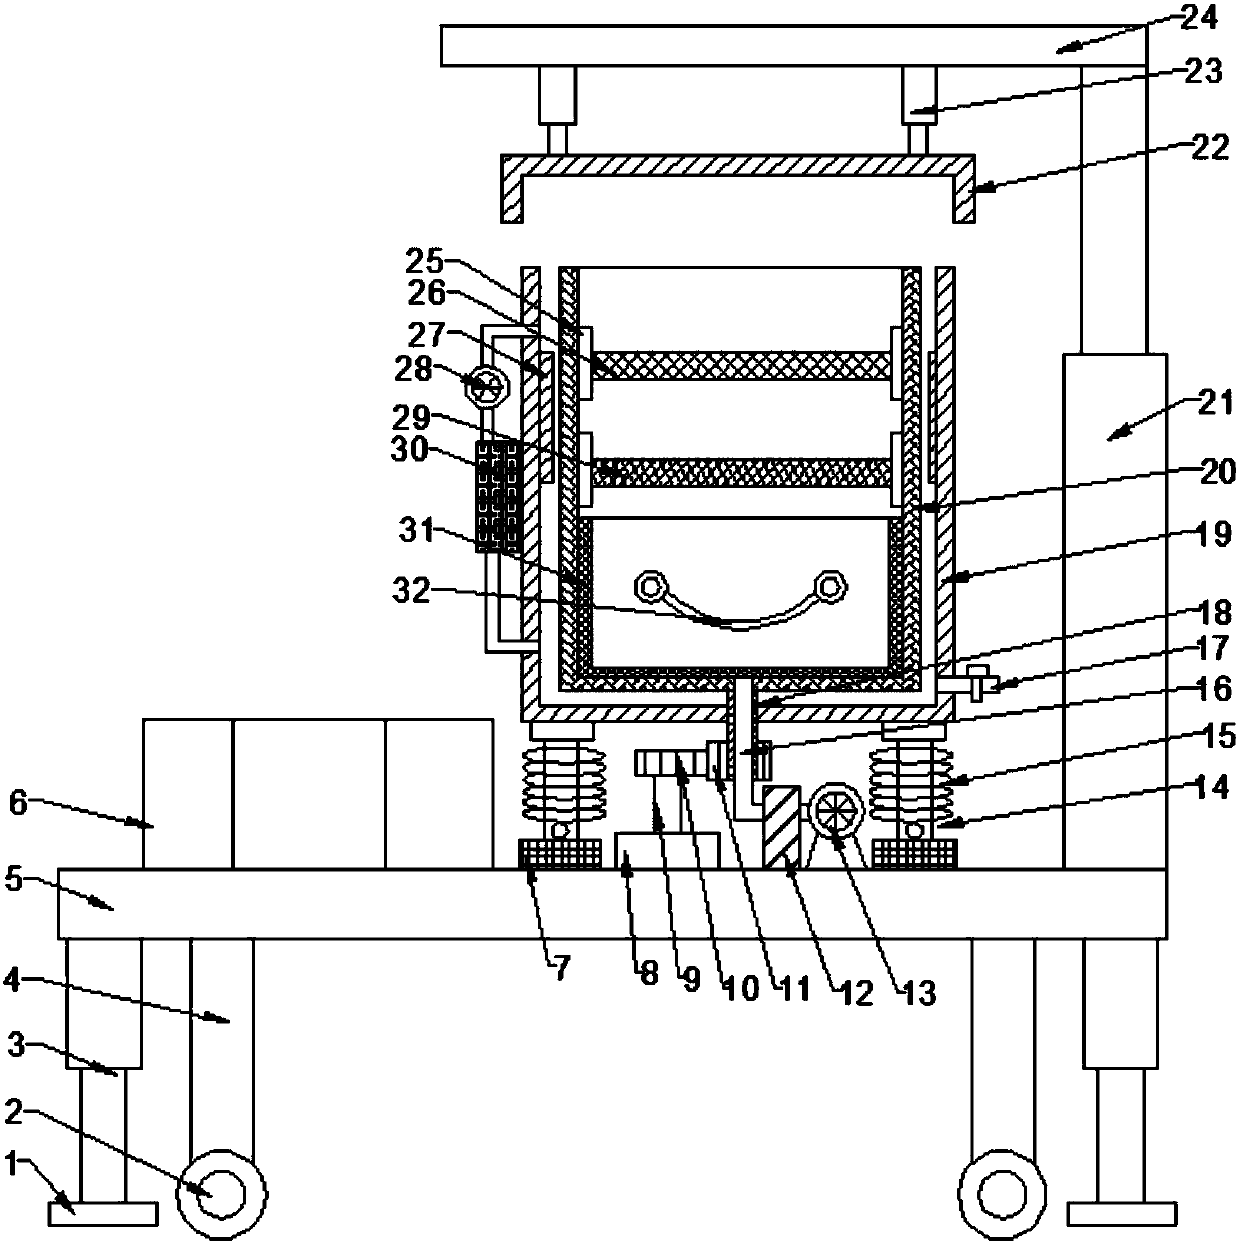 Agricultural grain dewatering and drying device with screening function